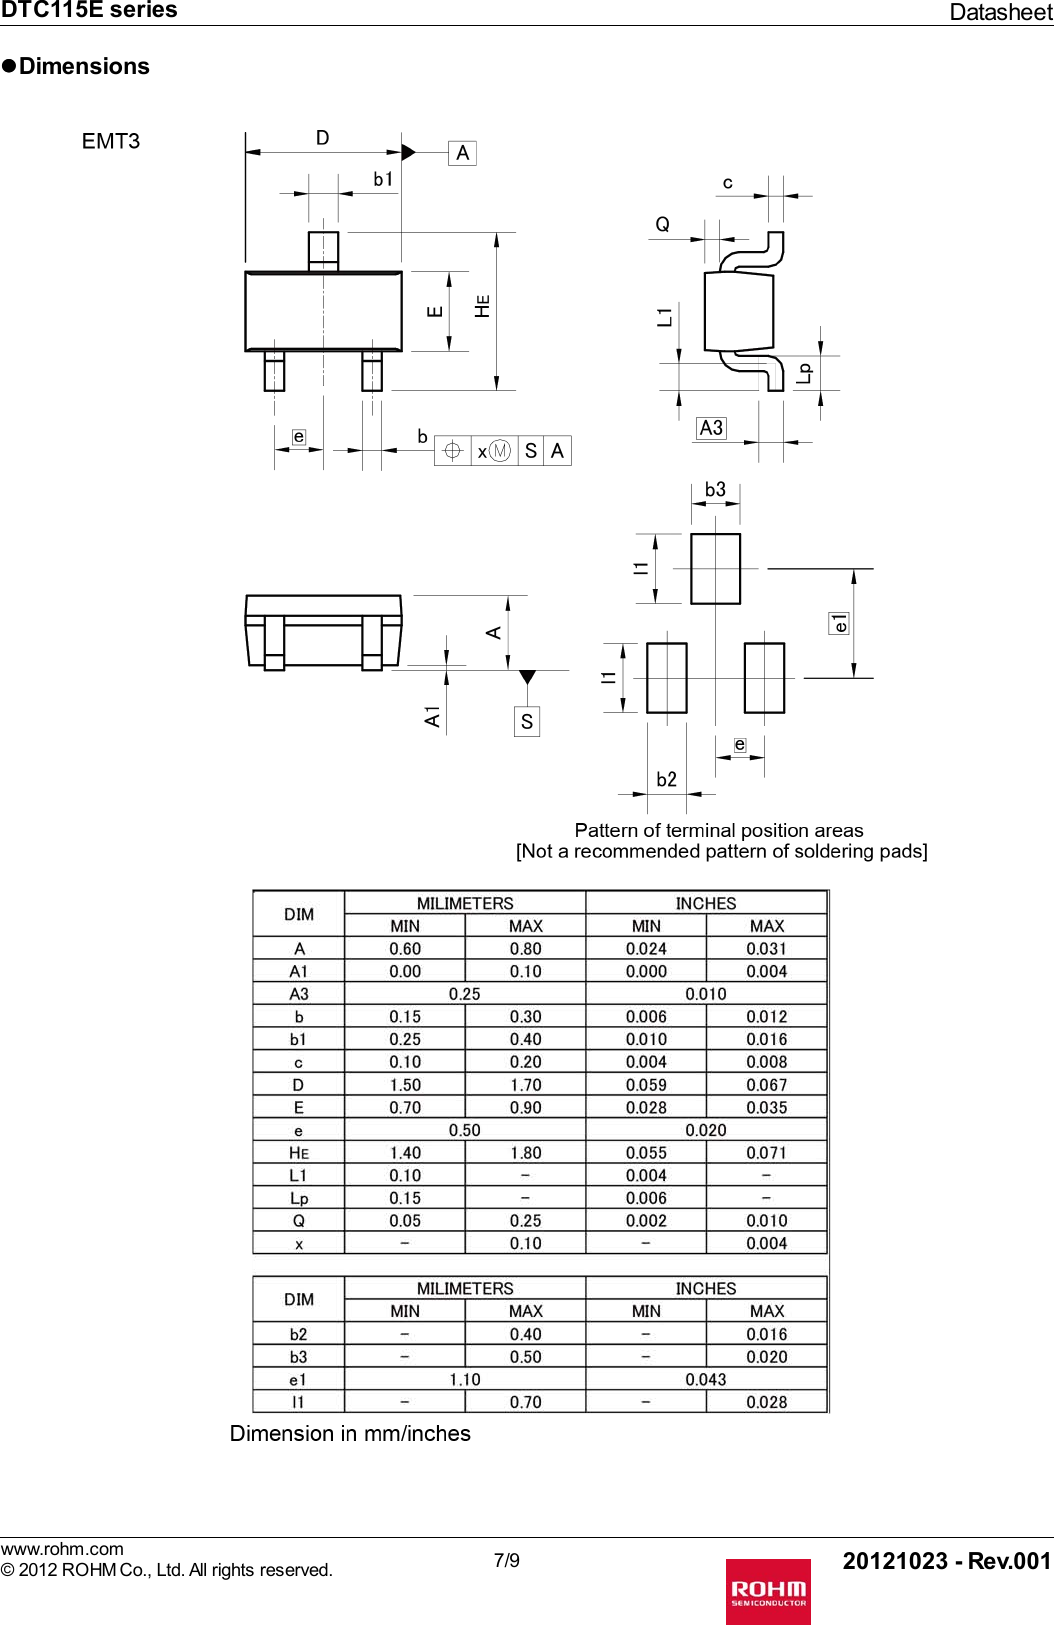 Page 7 of 11 - DTC115E Series - Datasheet. Www.s-manuals.com. Rohm